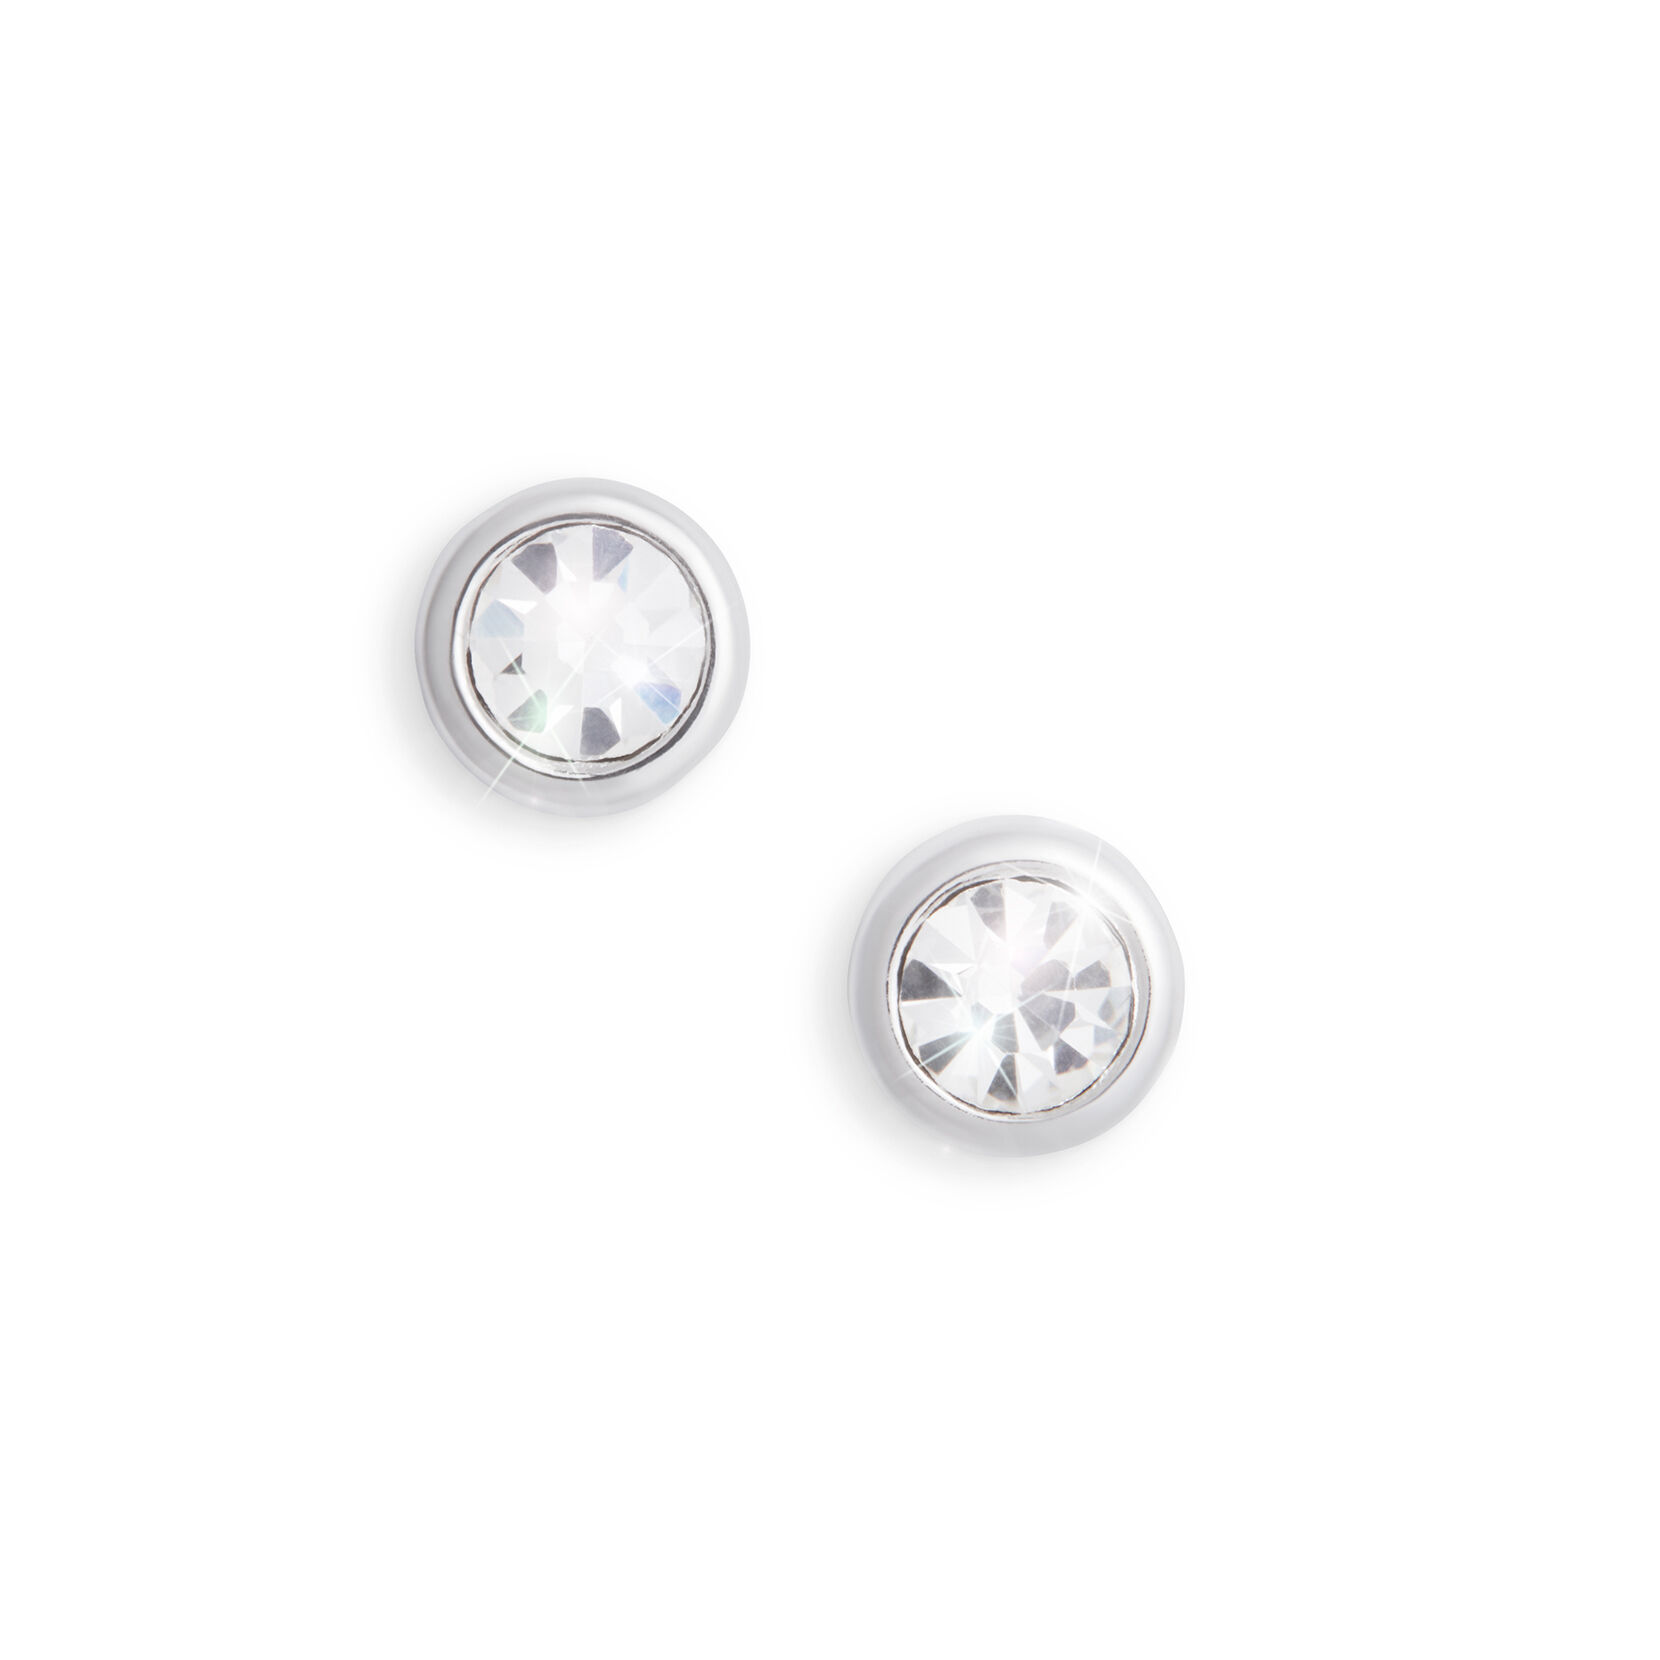 Bejeweled Classics Silver Round Stud Earrings